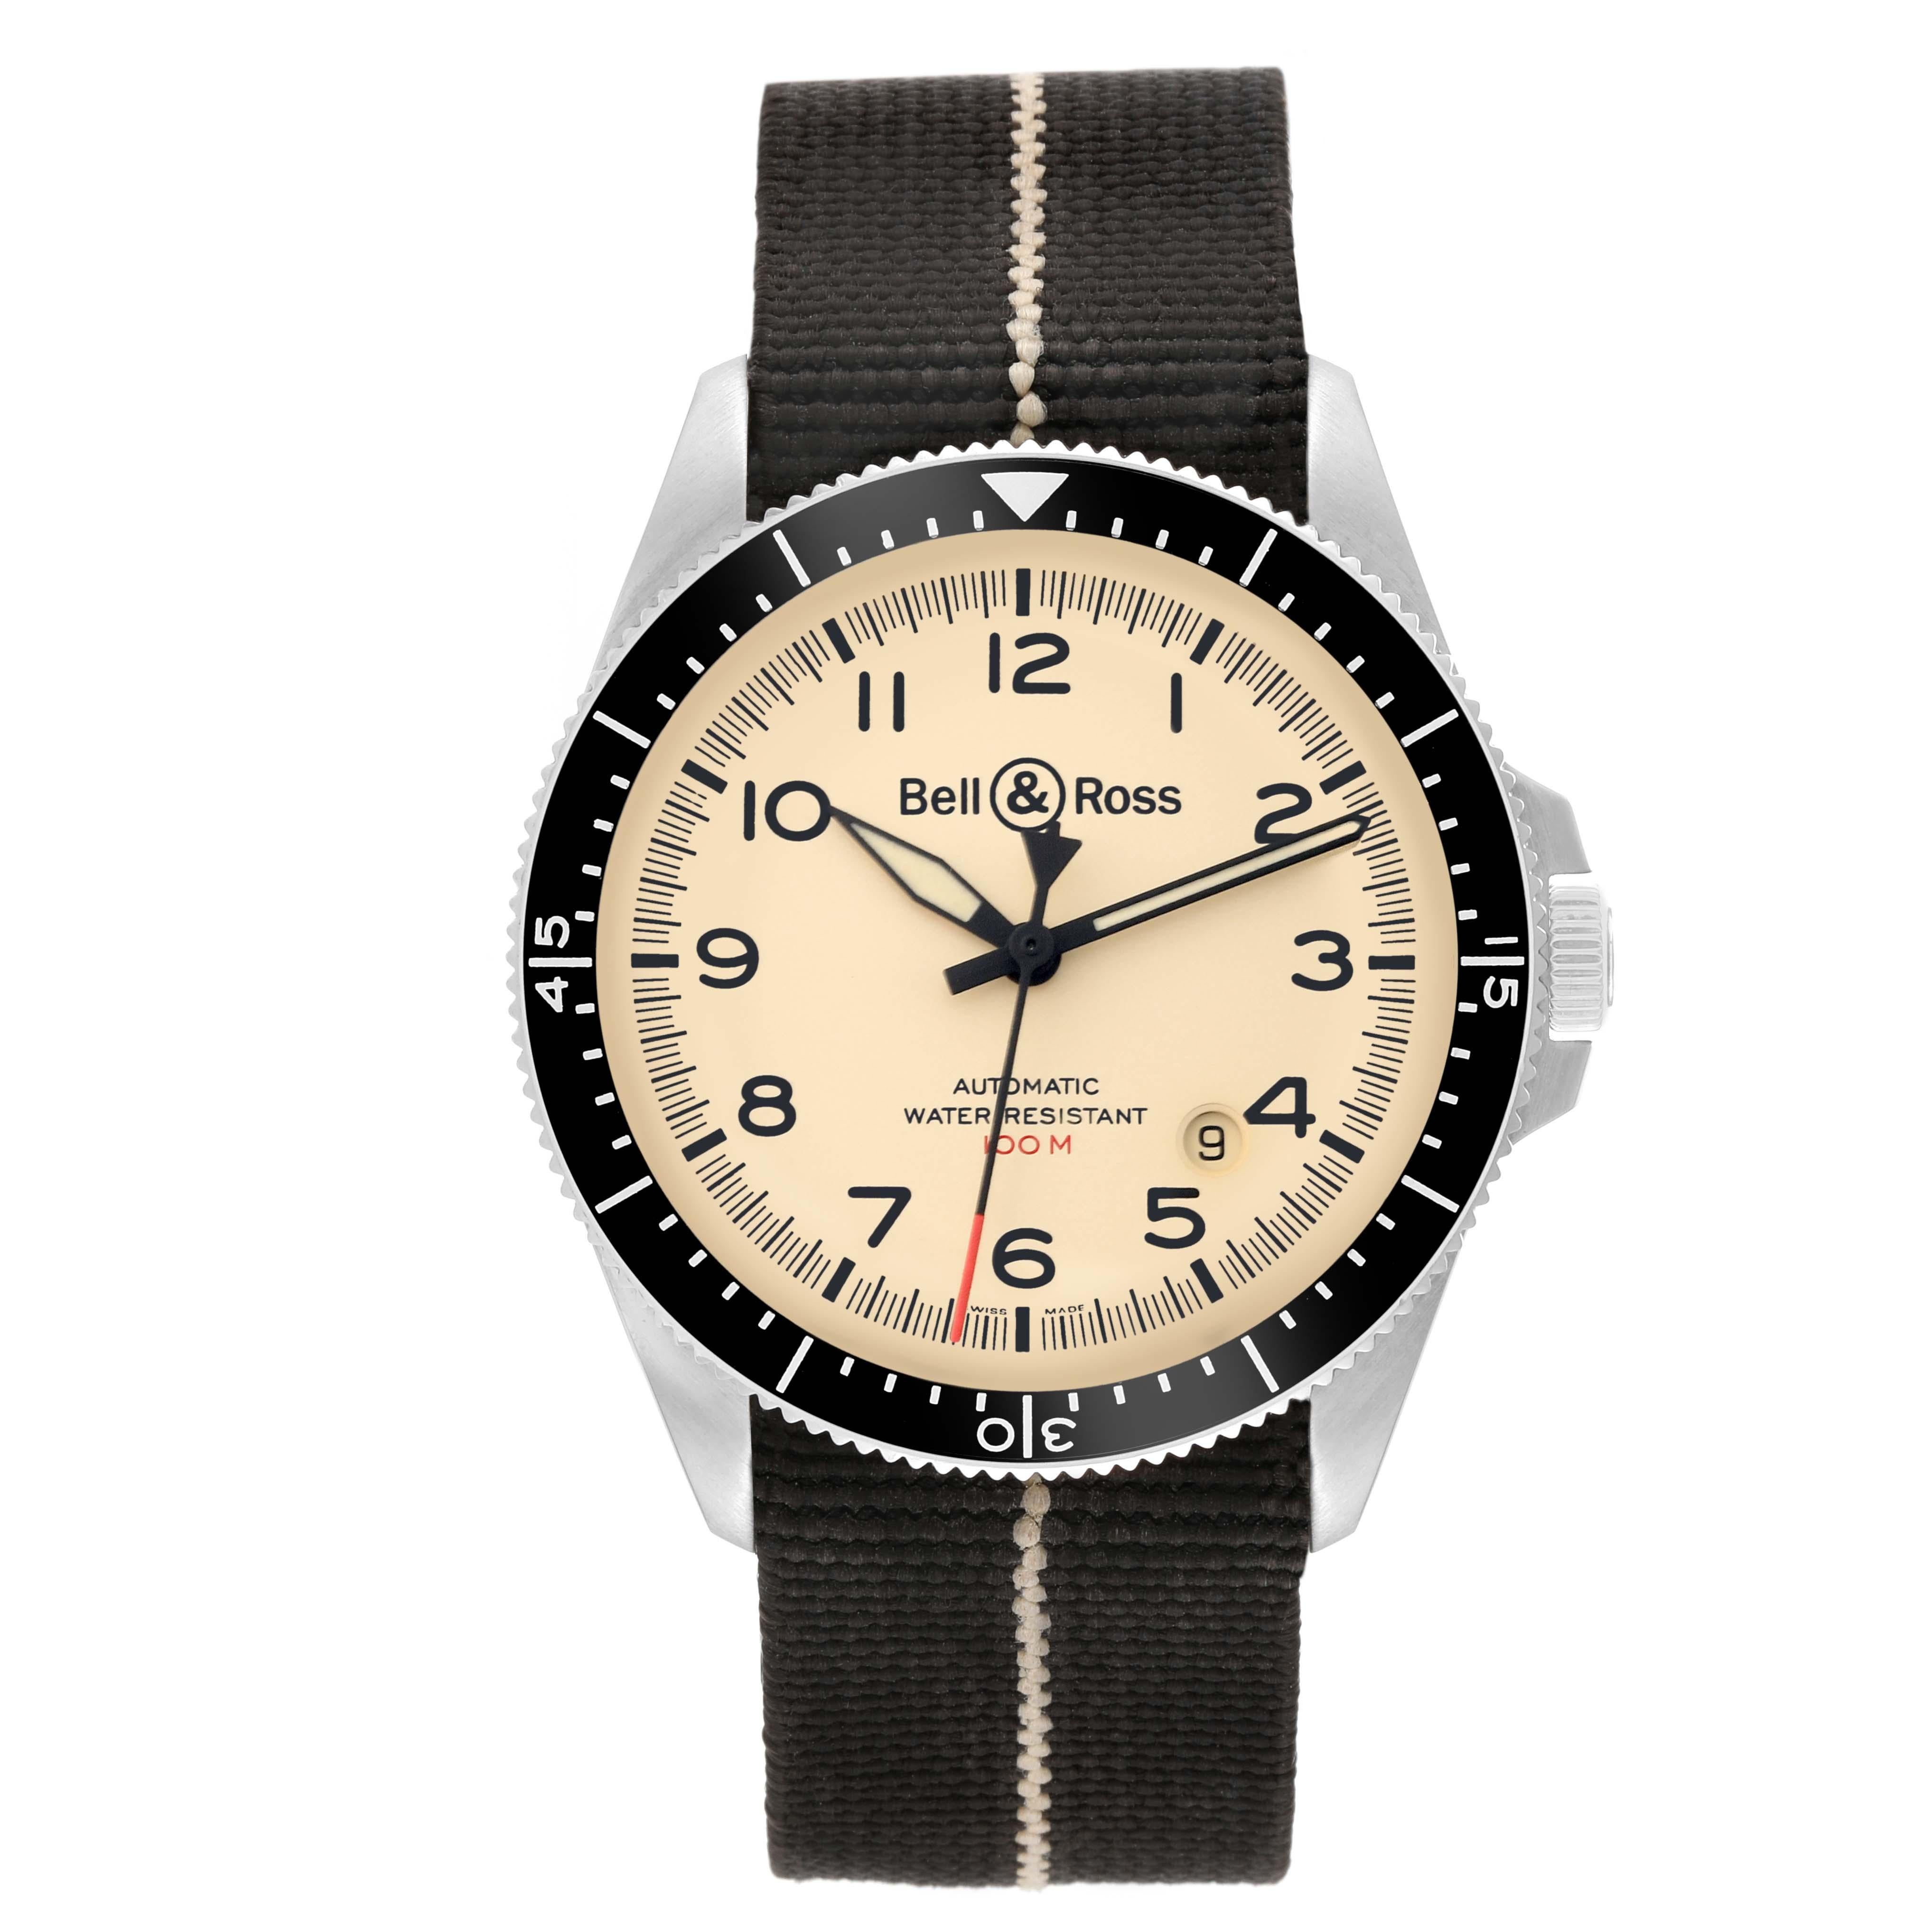 Bell & Ross Heritage Beige Dial Steel Mens Watch BRV292 Box Card. Automatic self-winding movement. Stainless steel round case 41.0 mm in diameter. Exhibition transparent sapphire crystal caseback. Black stainless steel bidirectional rotating bezel.